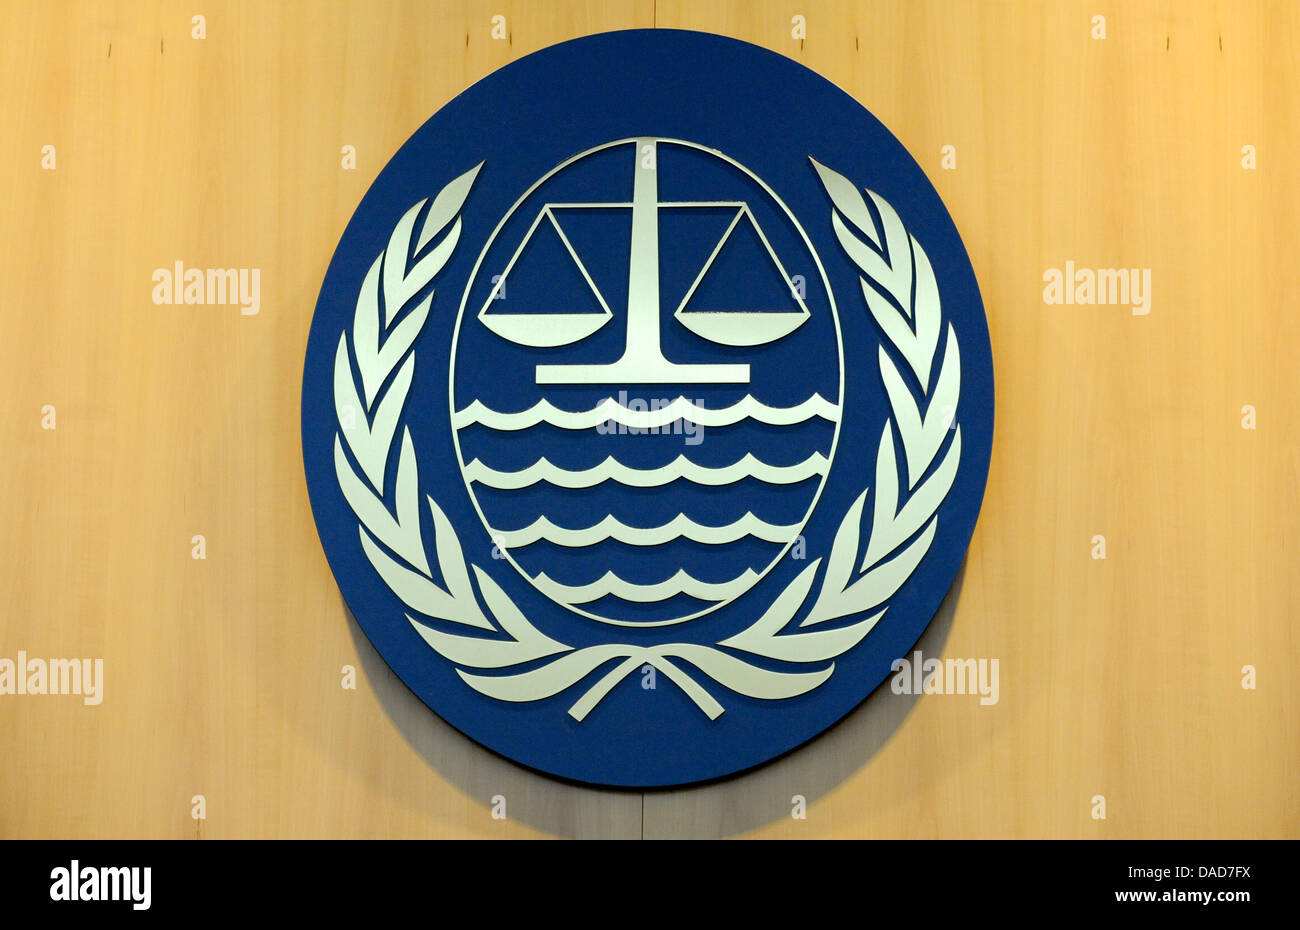 The emblem of the International Tribunal for the Law of the Sea is fixed above the entrance to the main court room in Hamburg, Germany, 05 October 2011. In August 1981, the United Nations Conference on the Law of the Sea declared Hamburg to the seat of the Tribunal. Photo: Angelika Warmuth Stock Photo